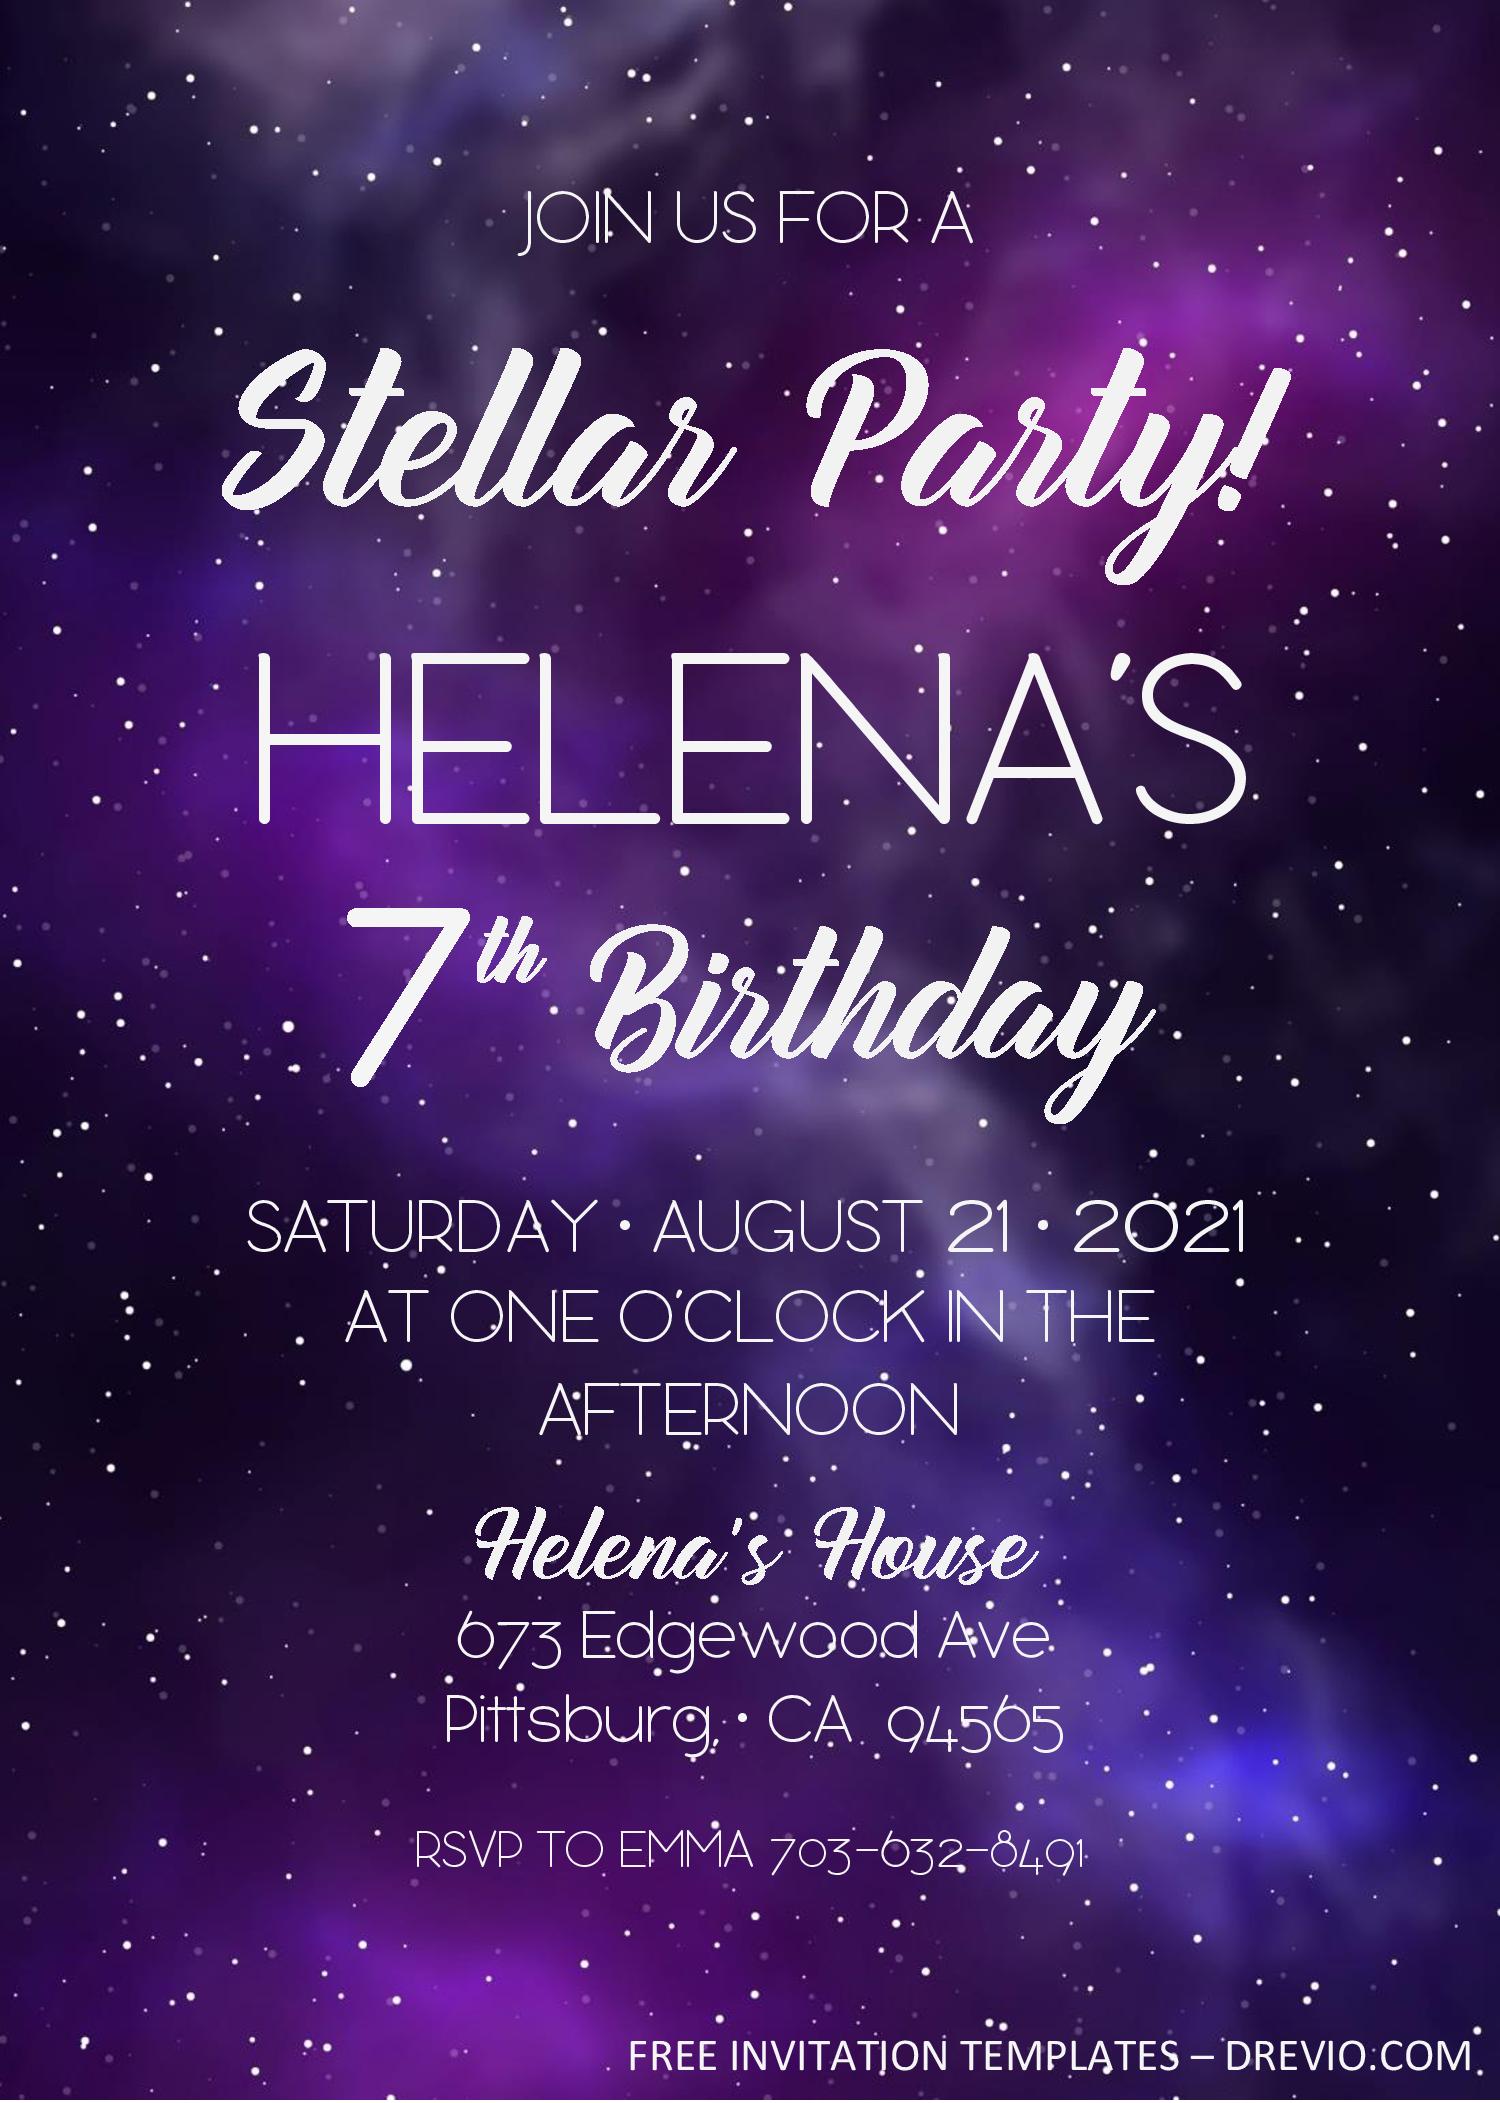 Galaxy Birthday Invitation Templates Editable With MS Word Download 